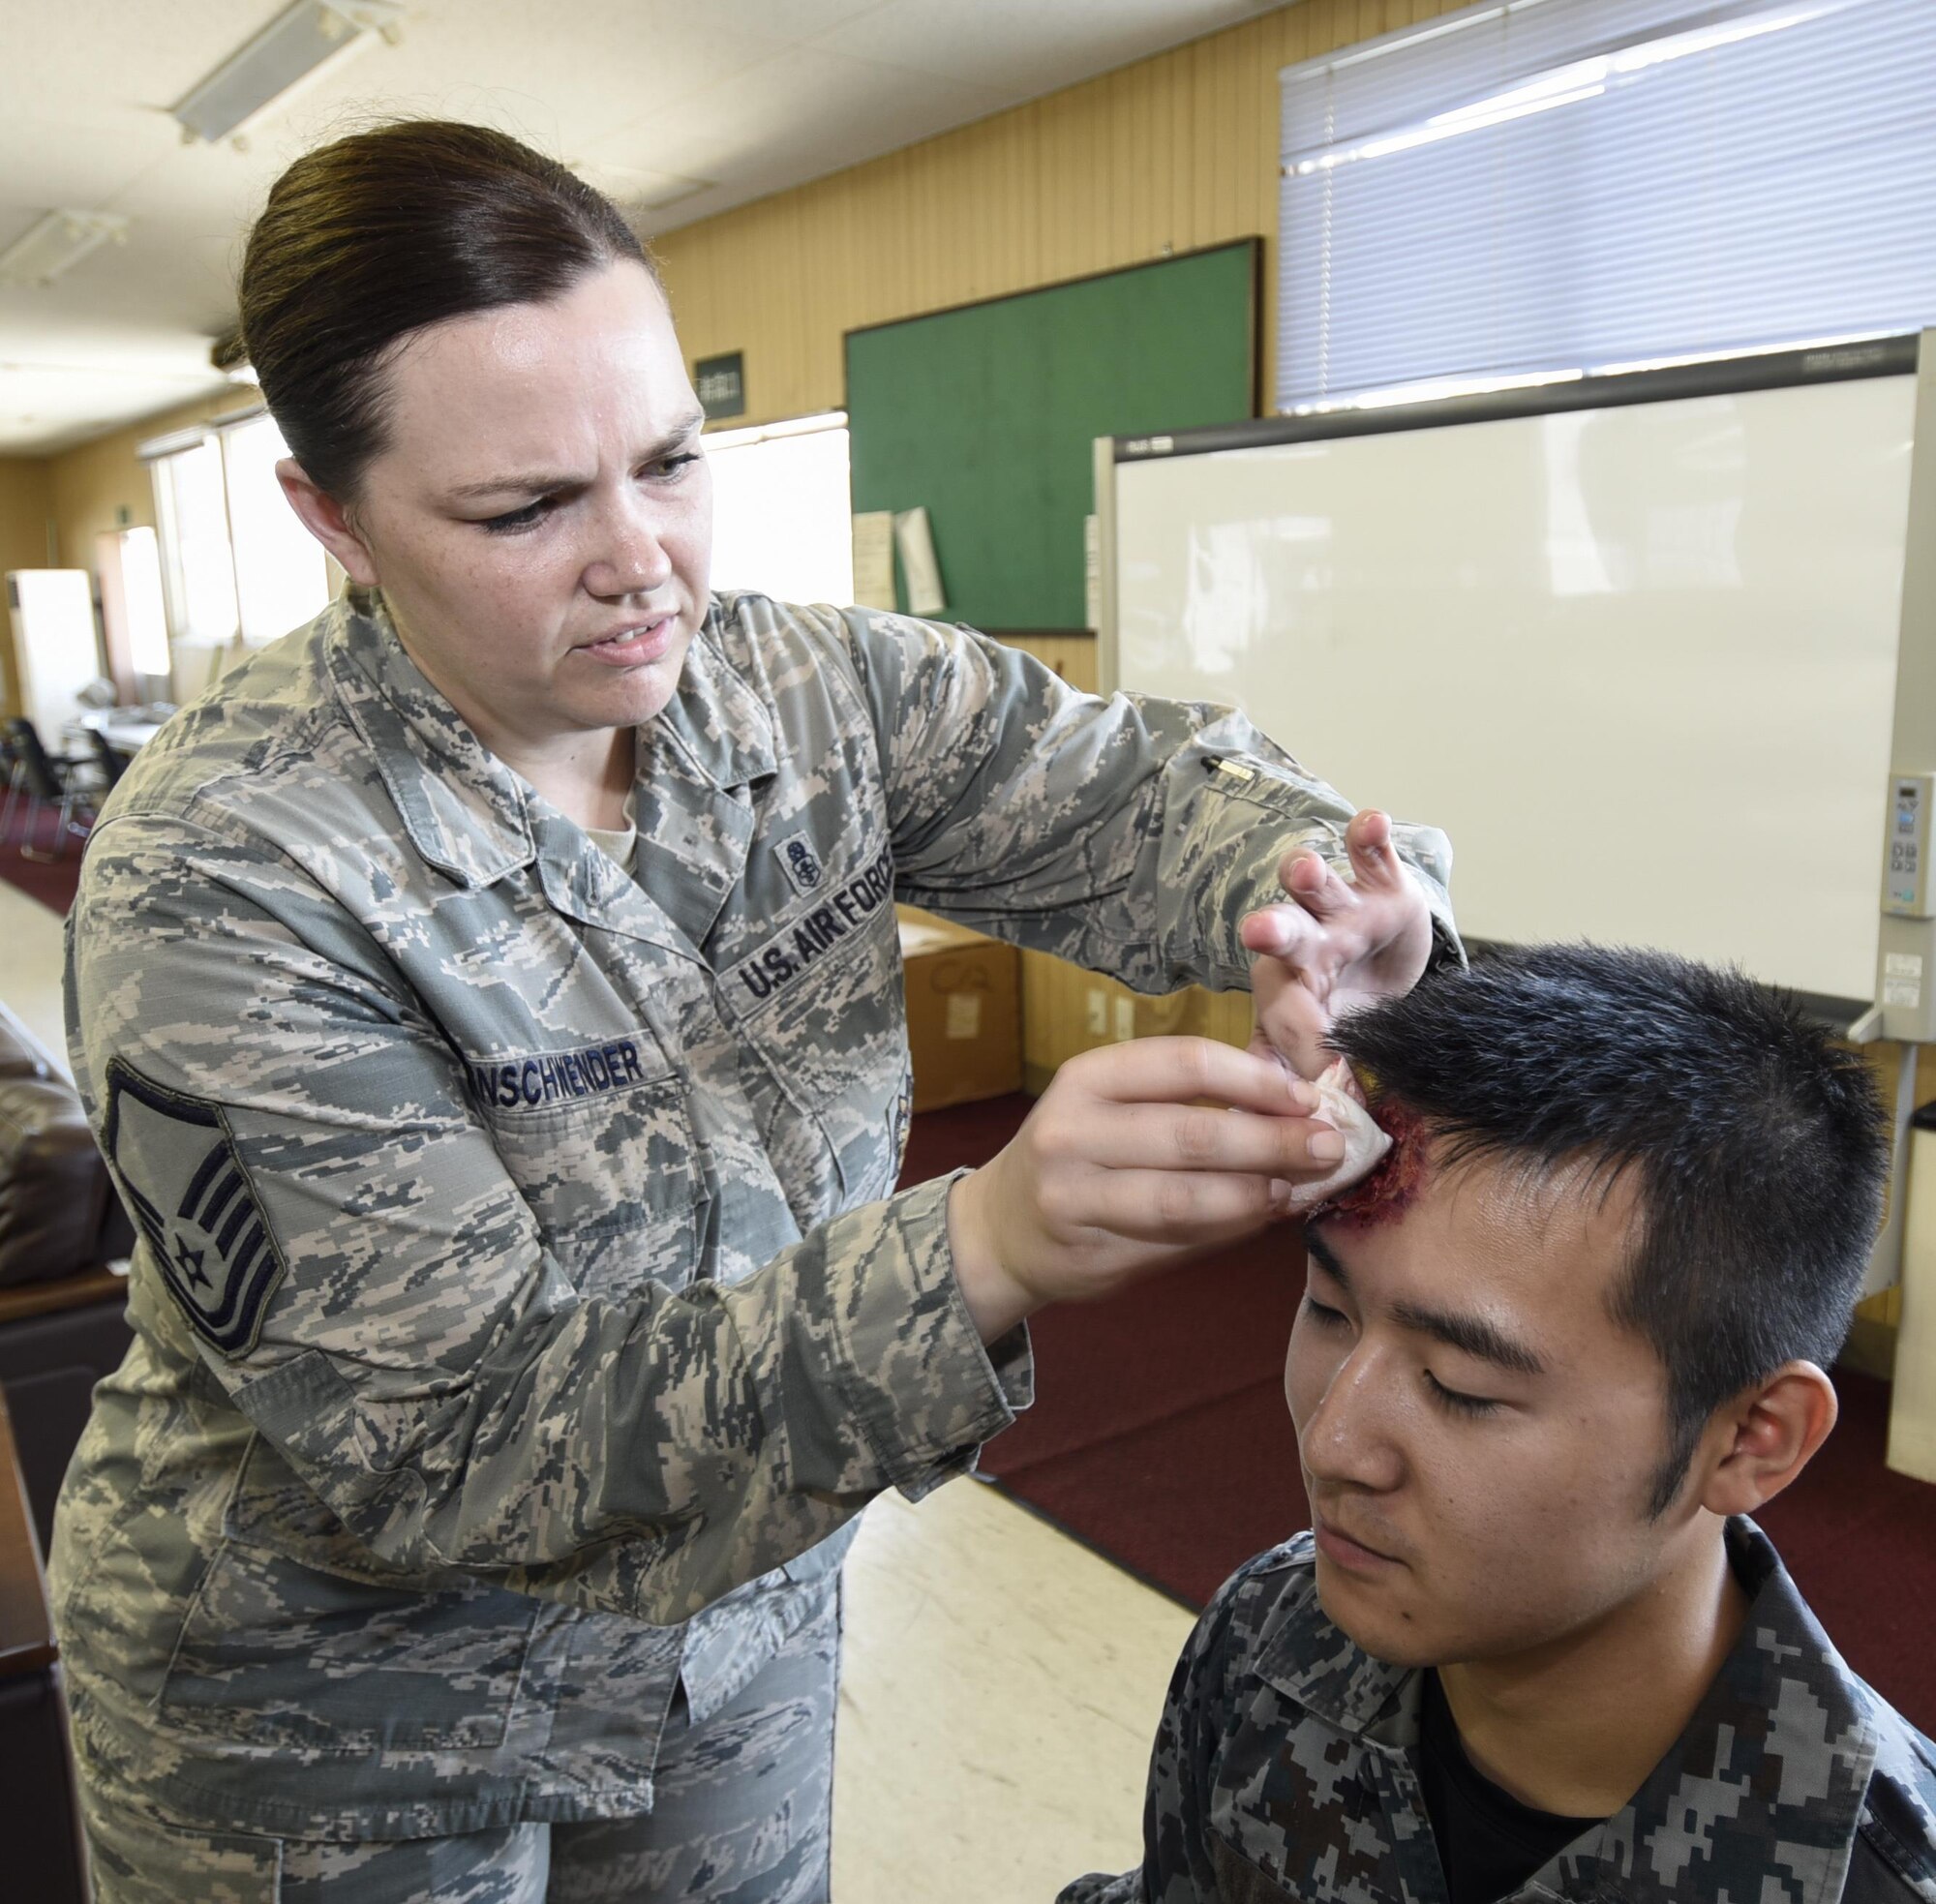 U.S. Air Force Master Sgt. Elizabeth Ehrnschwender, a wing self-assessment program manager with the 35th Fighter Wing staff agencies inspector general’s inspections office, left, applies moulage to Japan Air Self Defense Force Senior Airman Ken Tanaka prior to the start of a bilateral emergency management exercise at Misawa Air base, Japan, Aug. 31, 2016. Approximately 60 service members participated in the exercise to simulate injuries for medical staff to diagnose and respond to. (U.S. Air Force photo by Airman 1st Class Sadie Colbert)